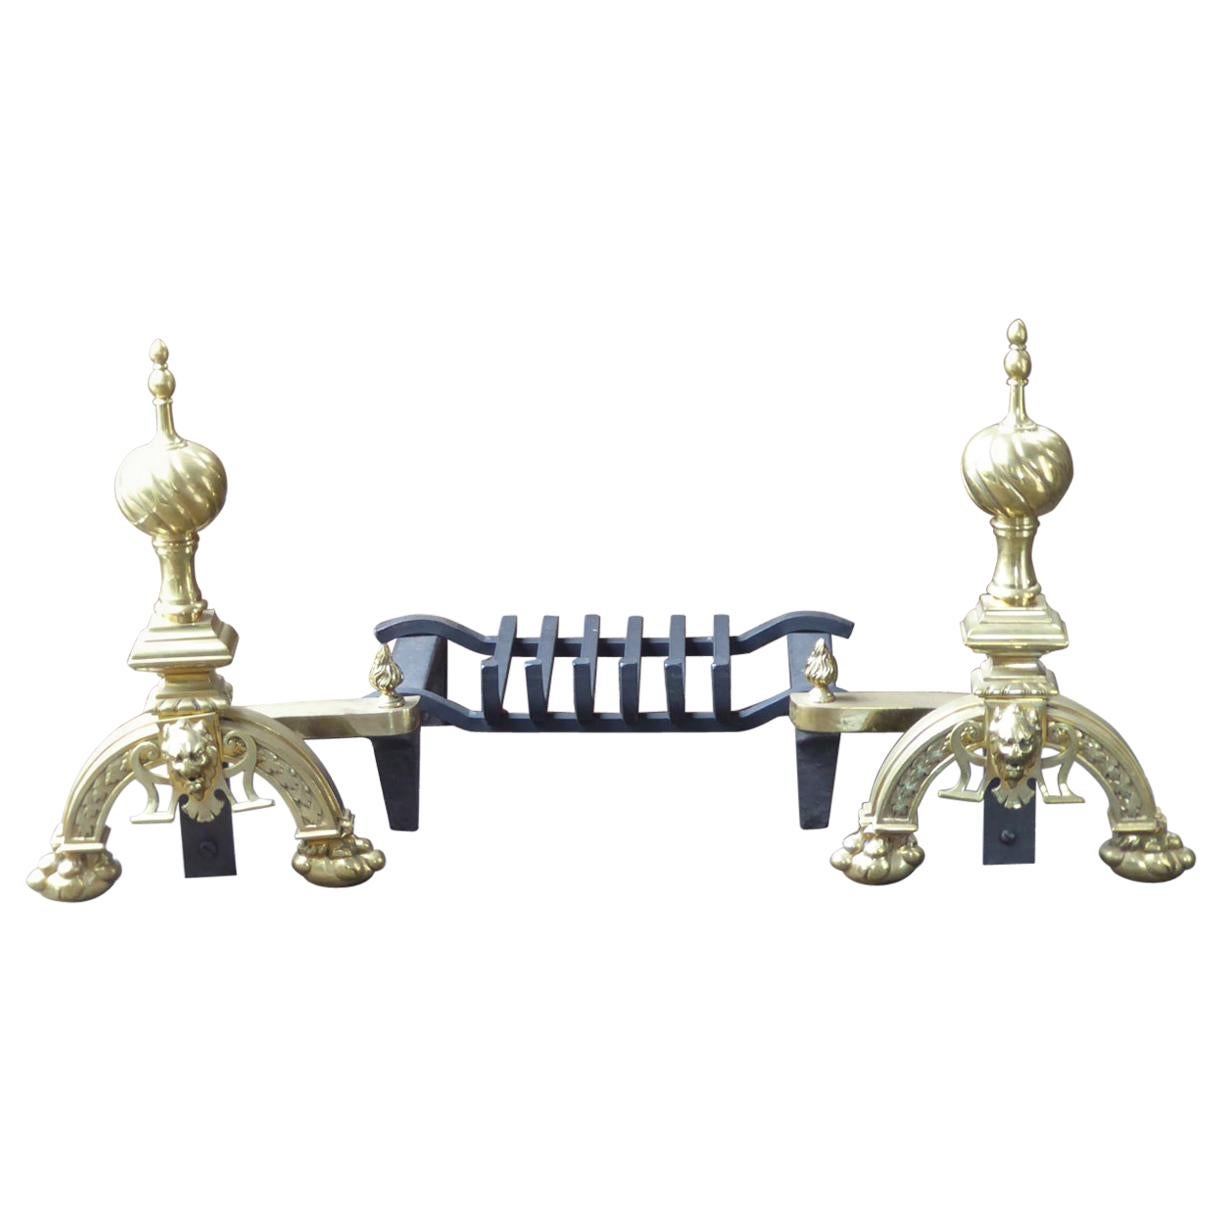 English Neo Gothic Fireplace Grate, Fire Grate For Sale